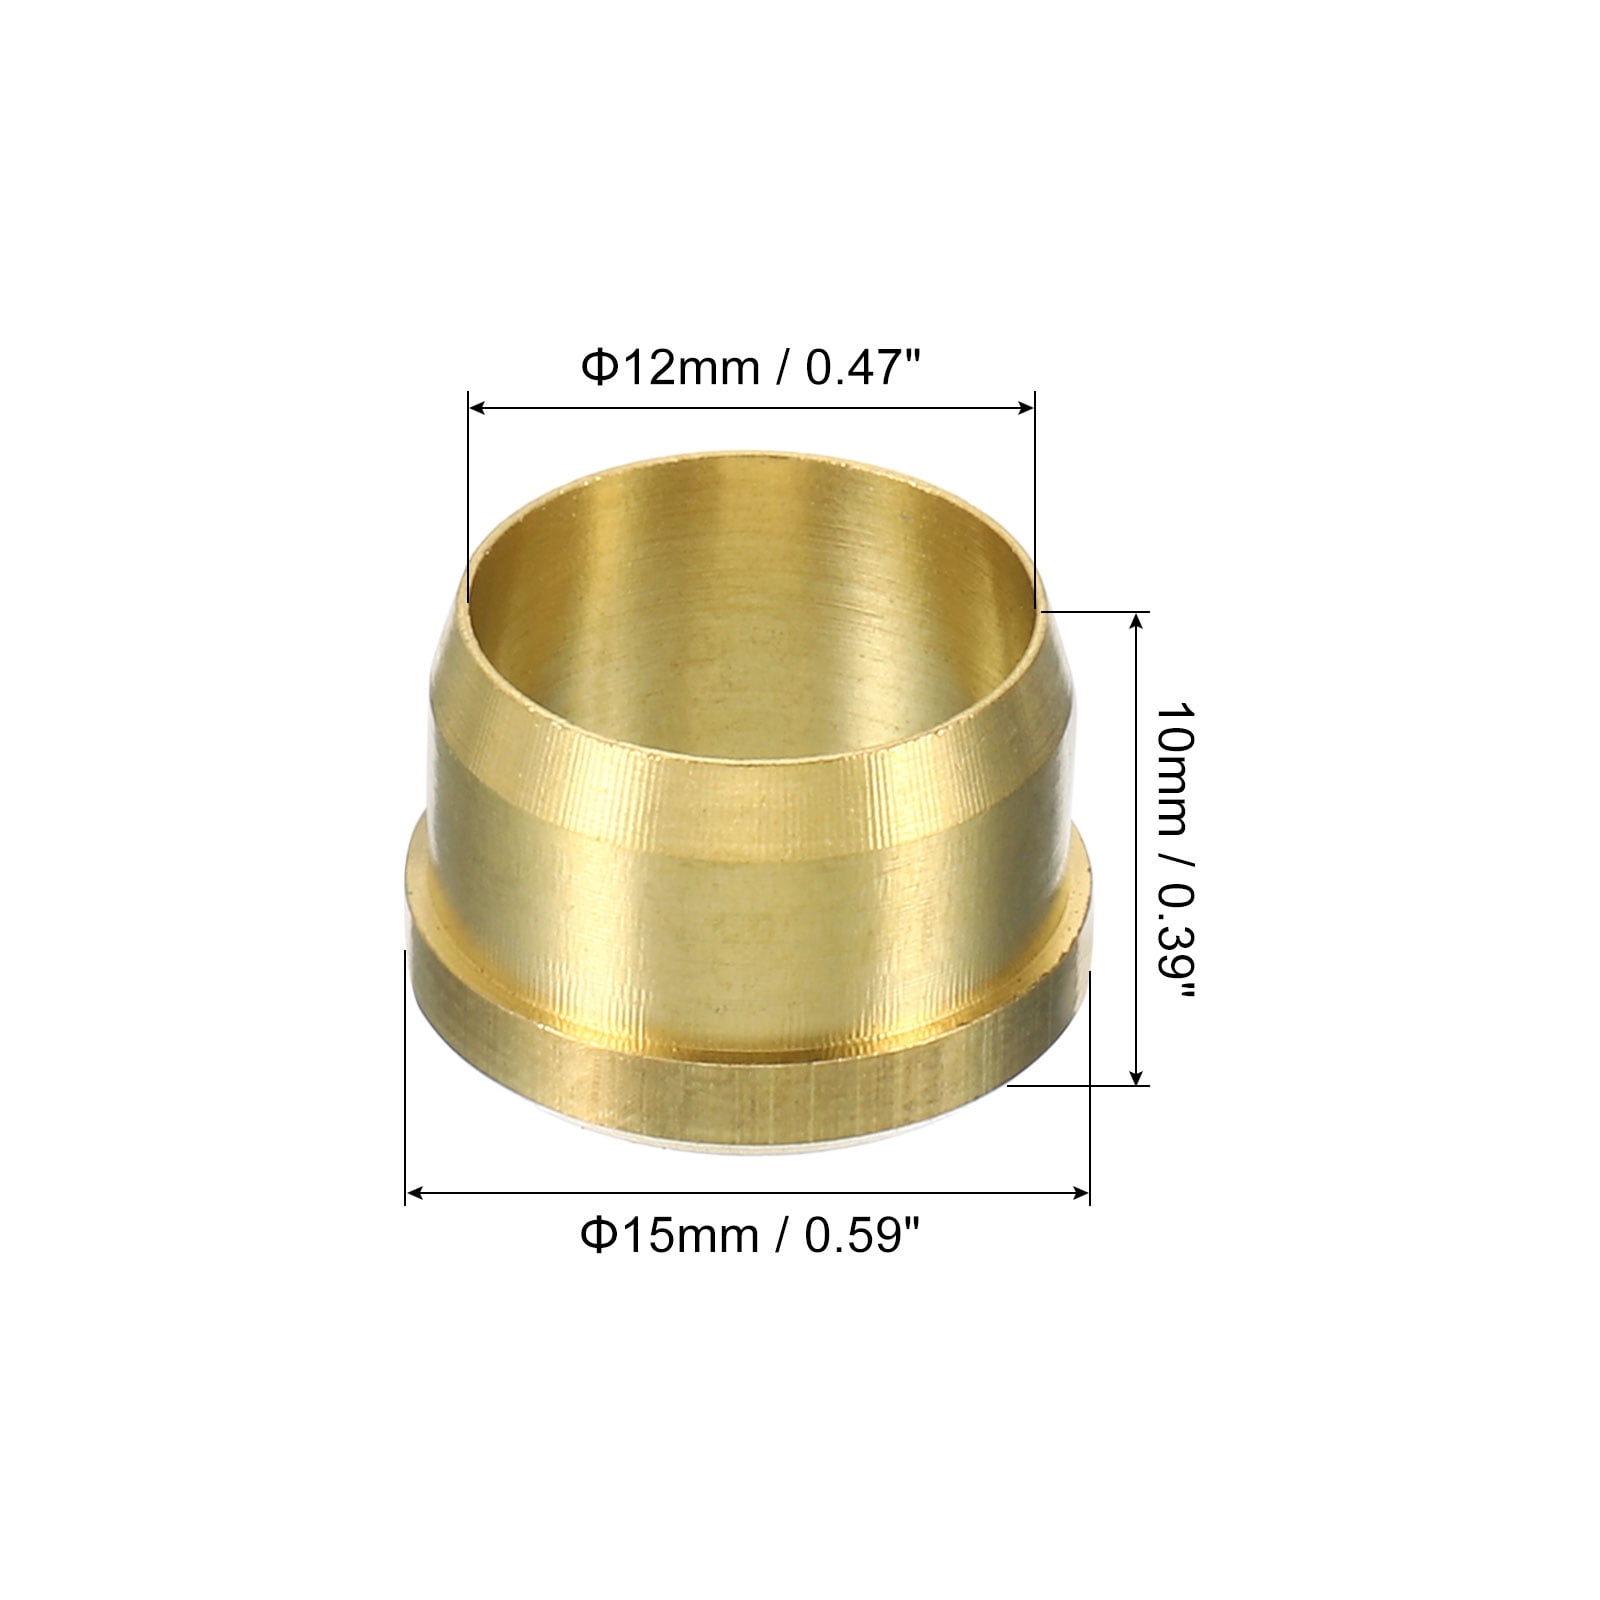 Uxcell 12mm Tube OD Brass Compression Sleeves Ferrules 10 Pack Brass  Compression Fitting Assortment Kit 